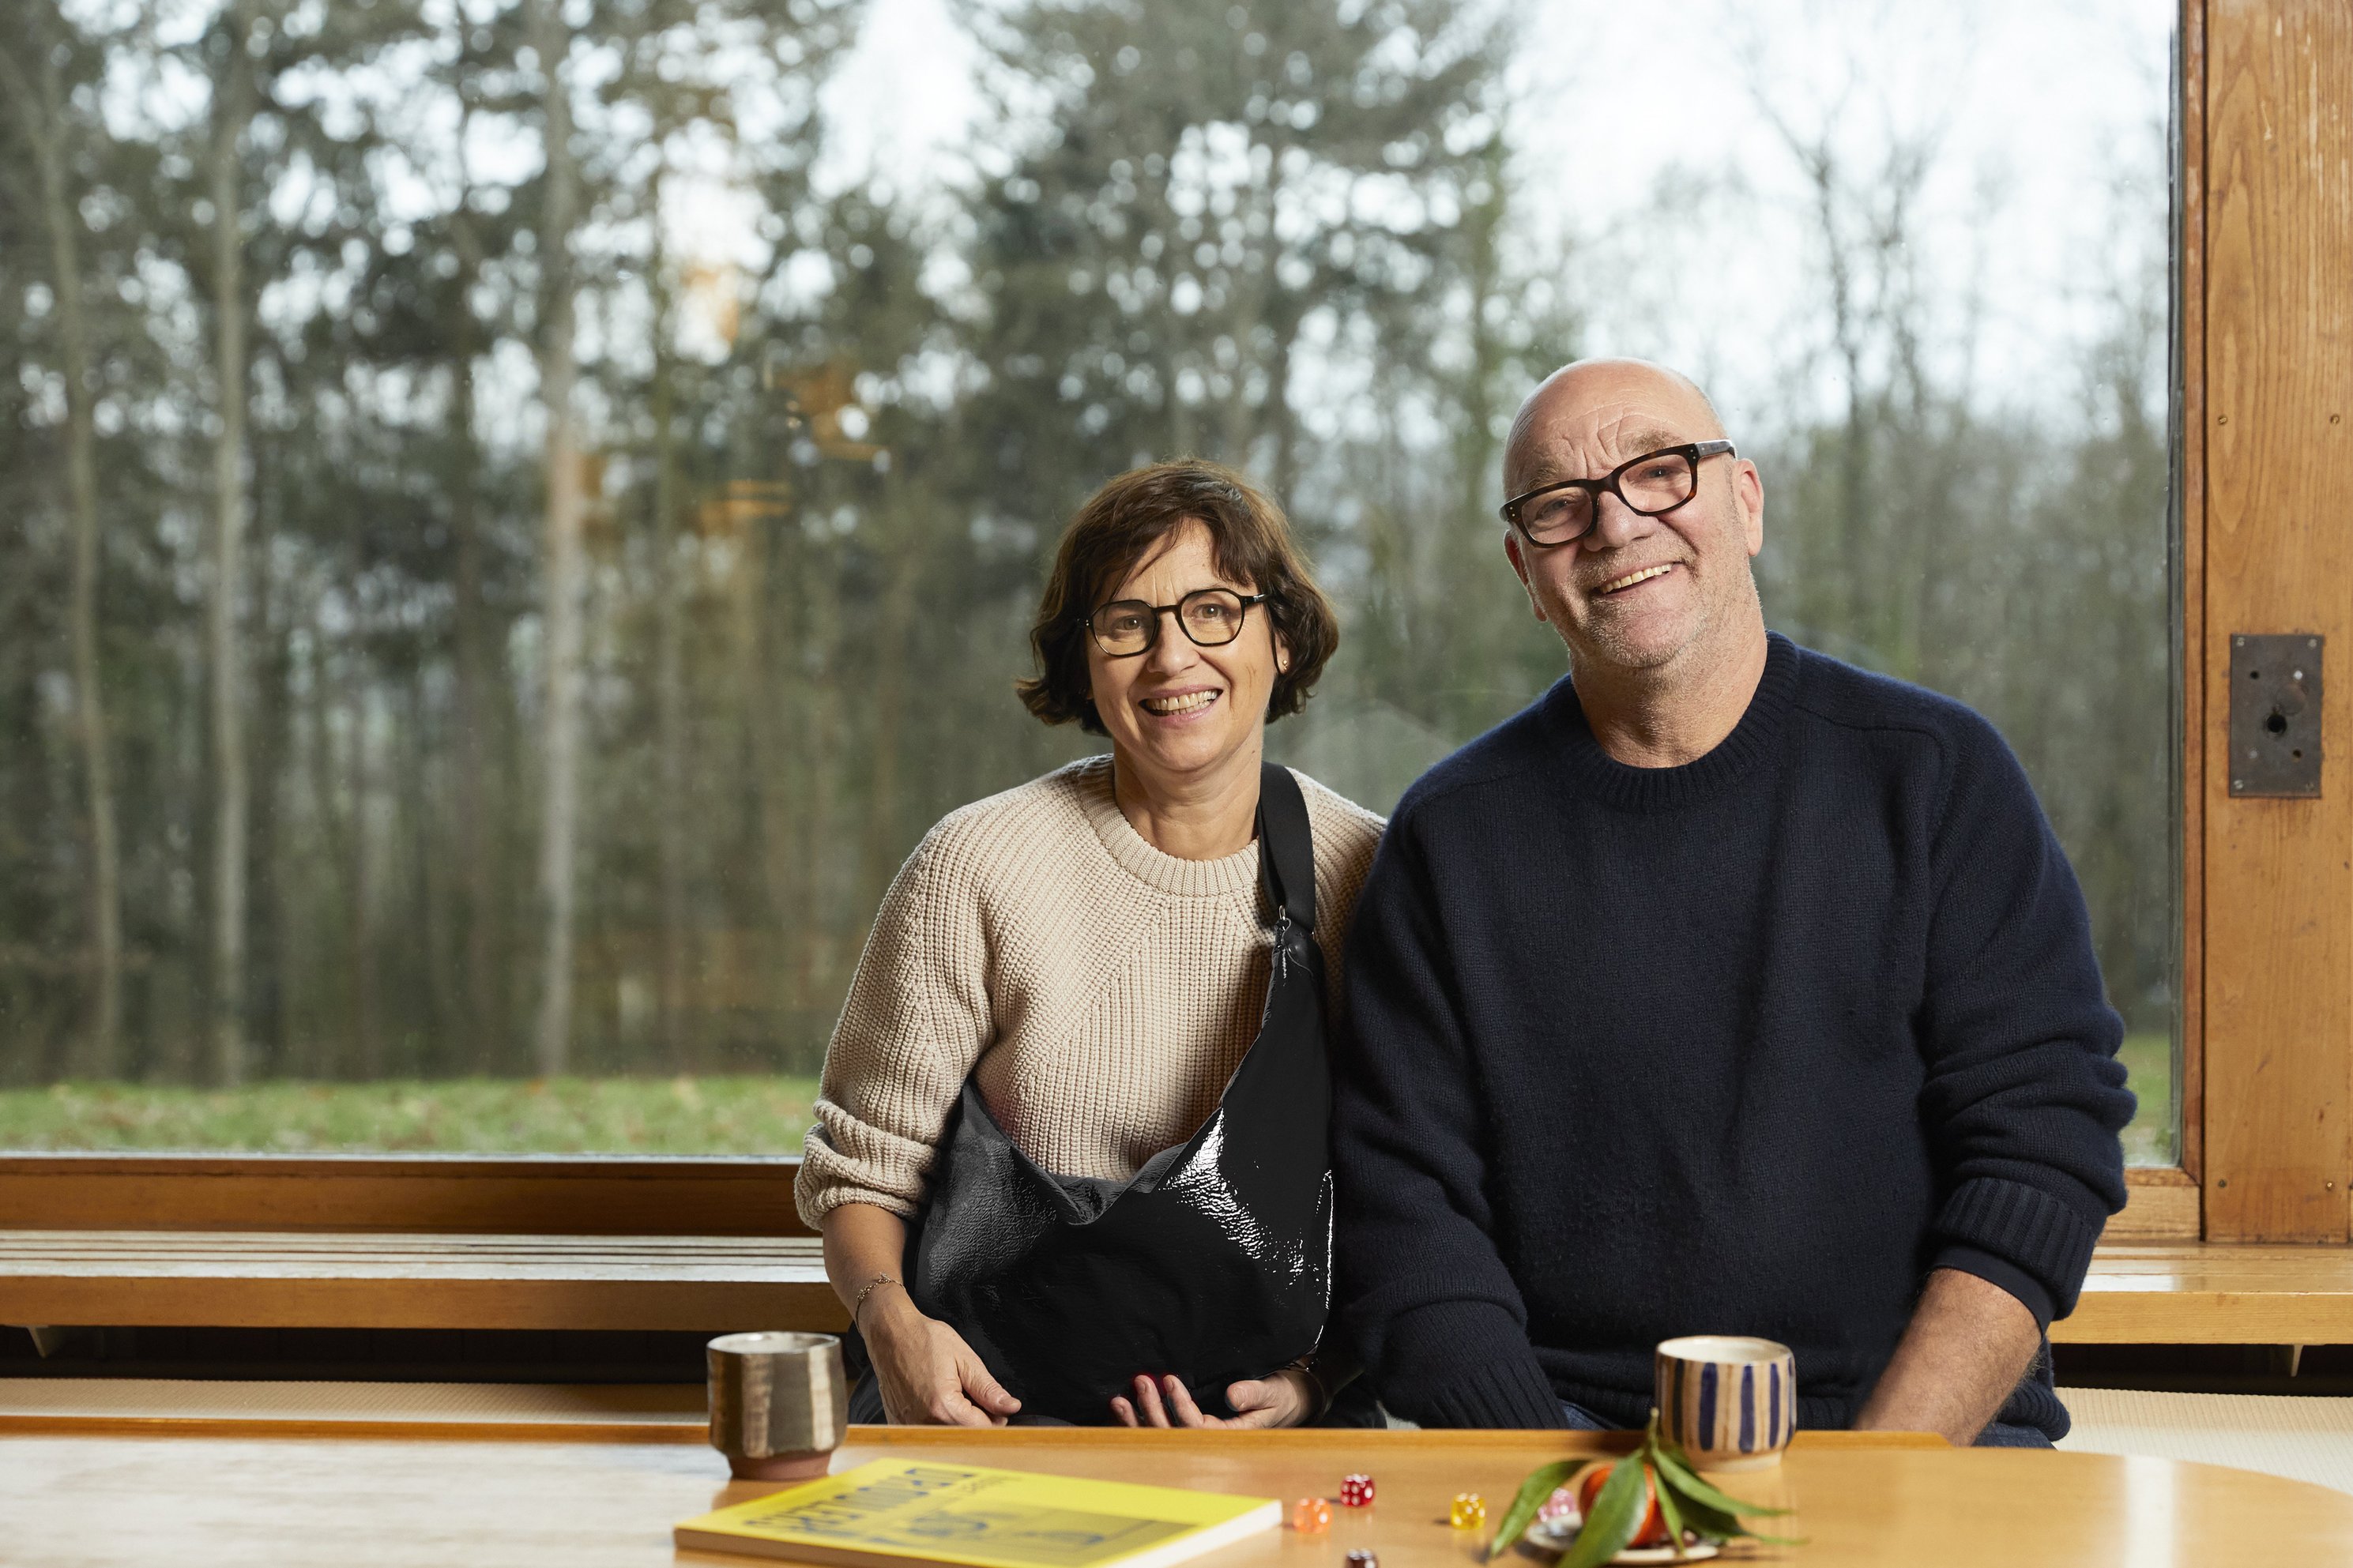 A look back at 35 years of accessories with Sophie Renier and Paul Droulers of the Jack Gomme brand